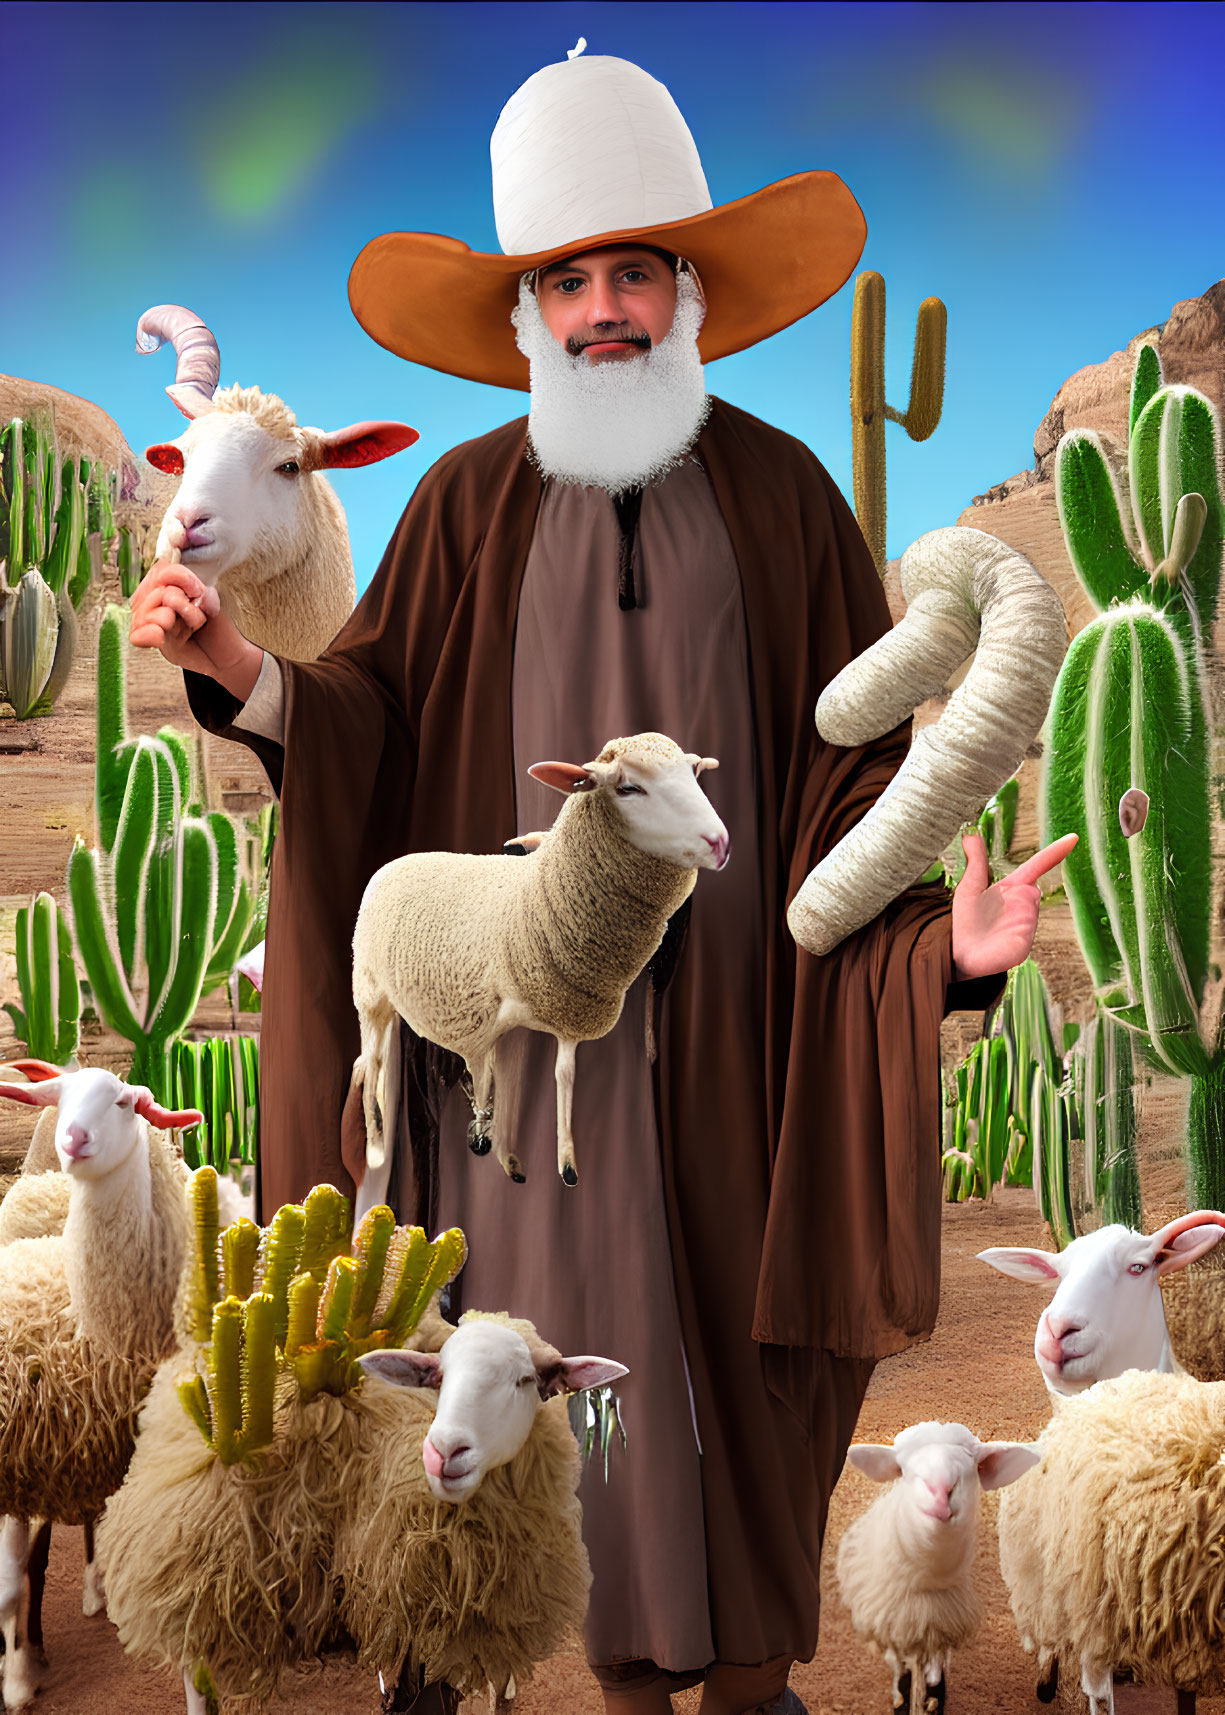 Man in Cowboy Hat with Sheep and Cacti Under Colorful Sky